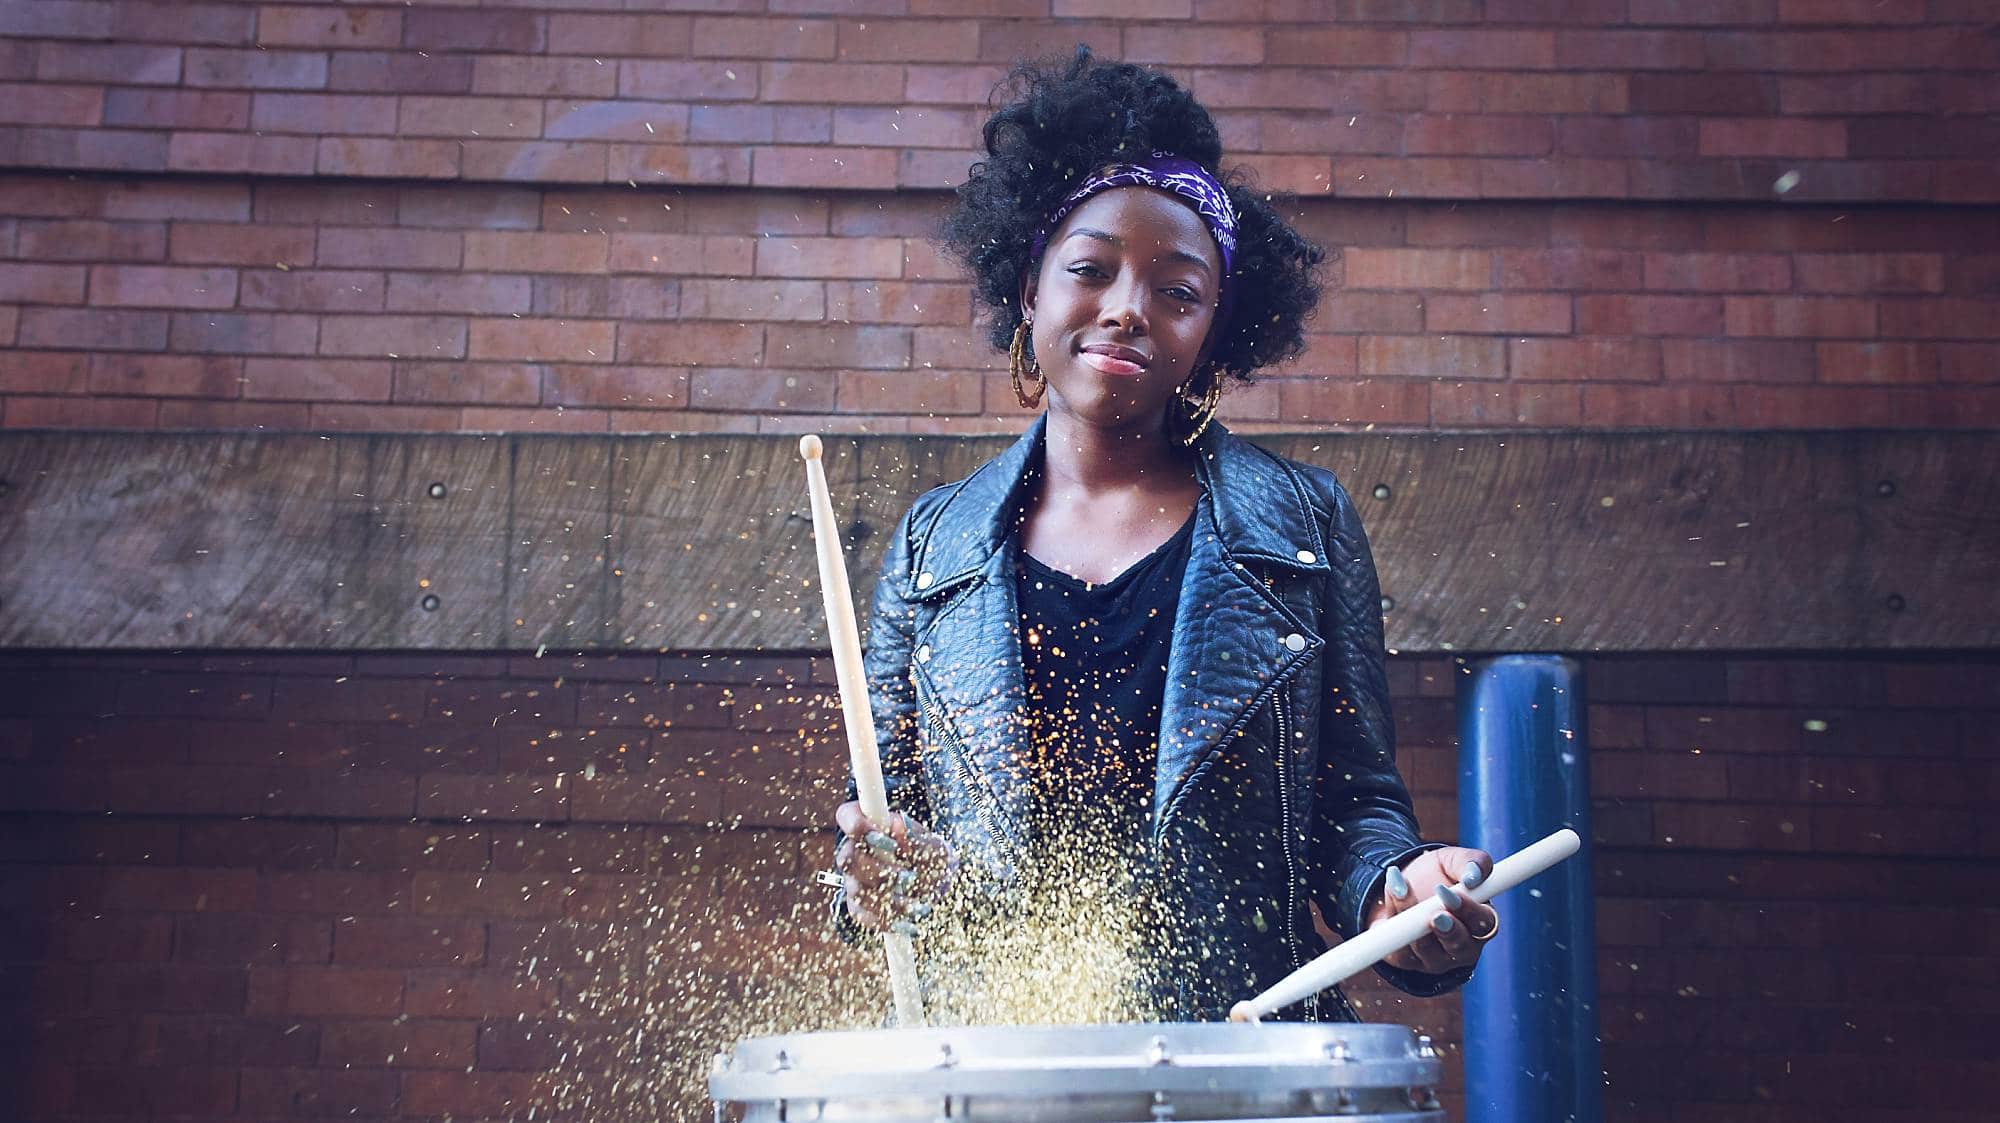 image of a black girl in a leather jacket and black top, hitting a snare drum with gold glitter puffing up.